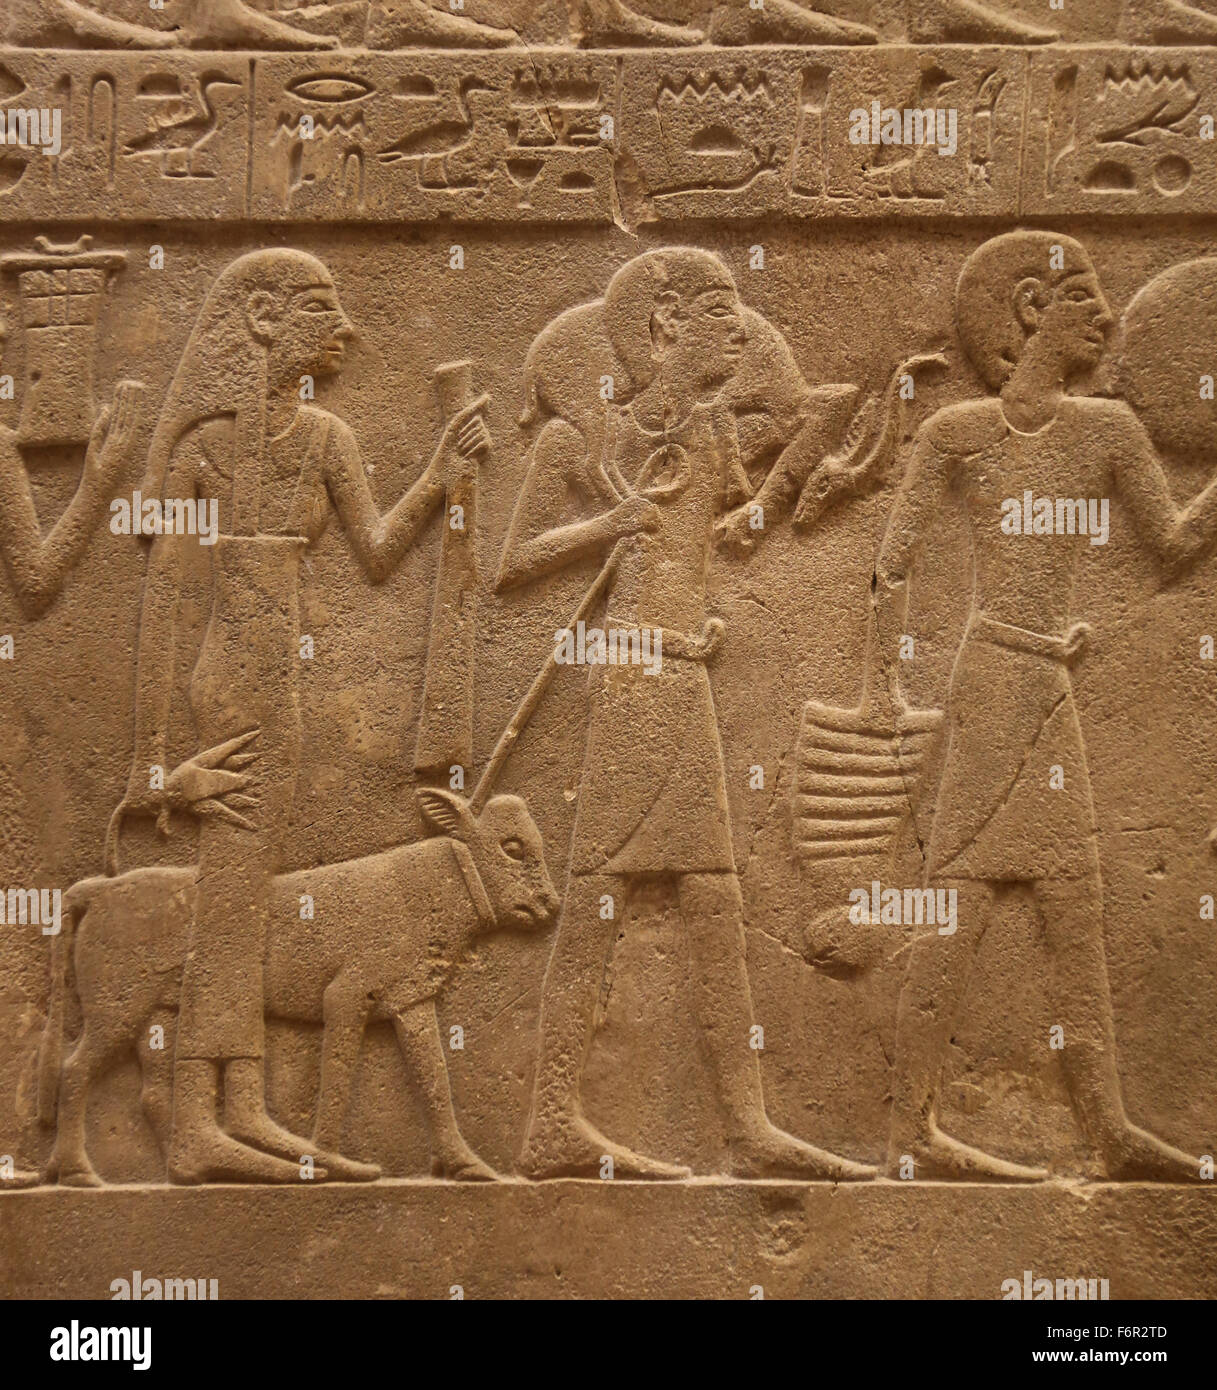 Stele of mayor Intef and his family. 12th Dynasty. Middle Kingdom. Limestone. Louvre Museum. Paris. France. Stock Photo